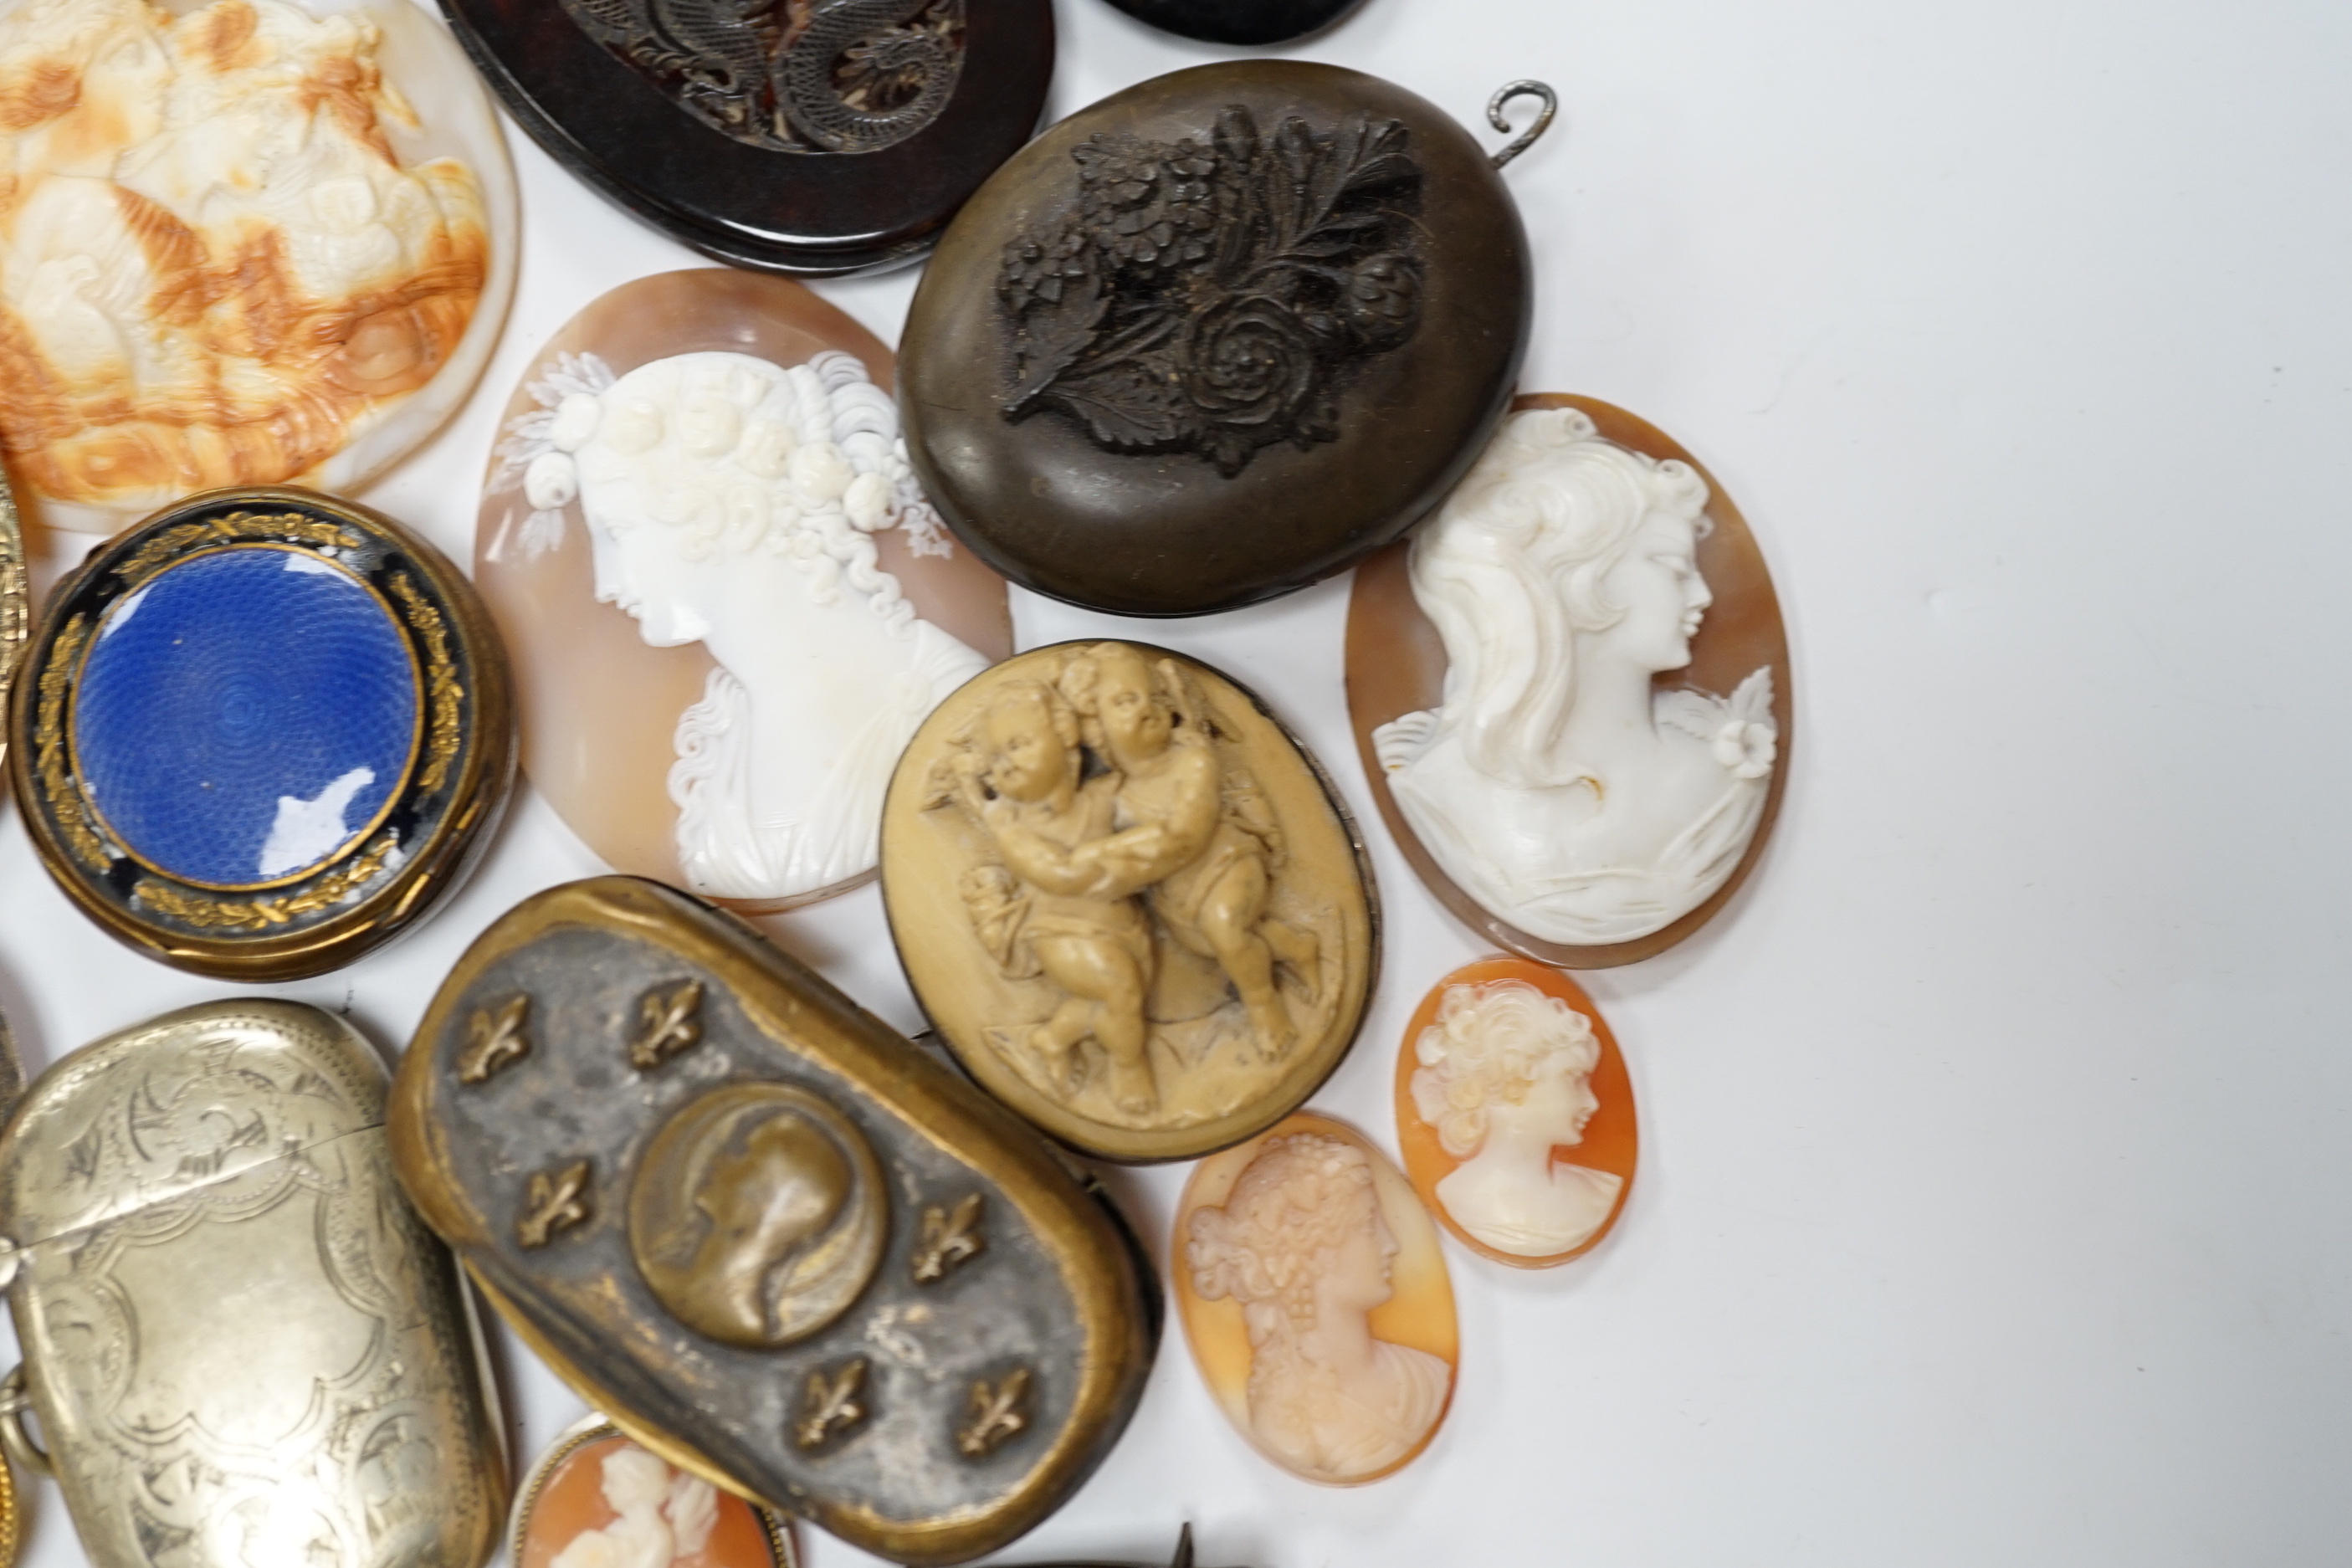 Five assorted unmounted carved cameo shells, largest 57mm, four other mounted cameo brooches including three shell, two base metal vestas and a box and sundry other items.